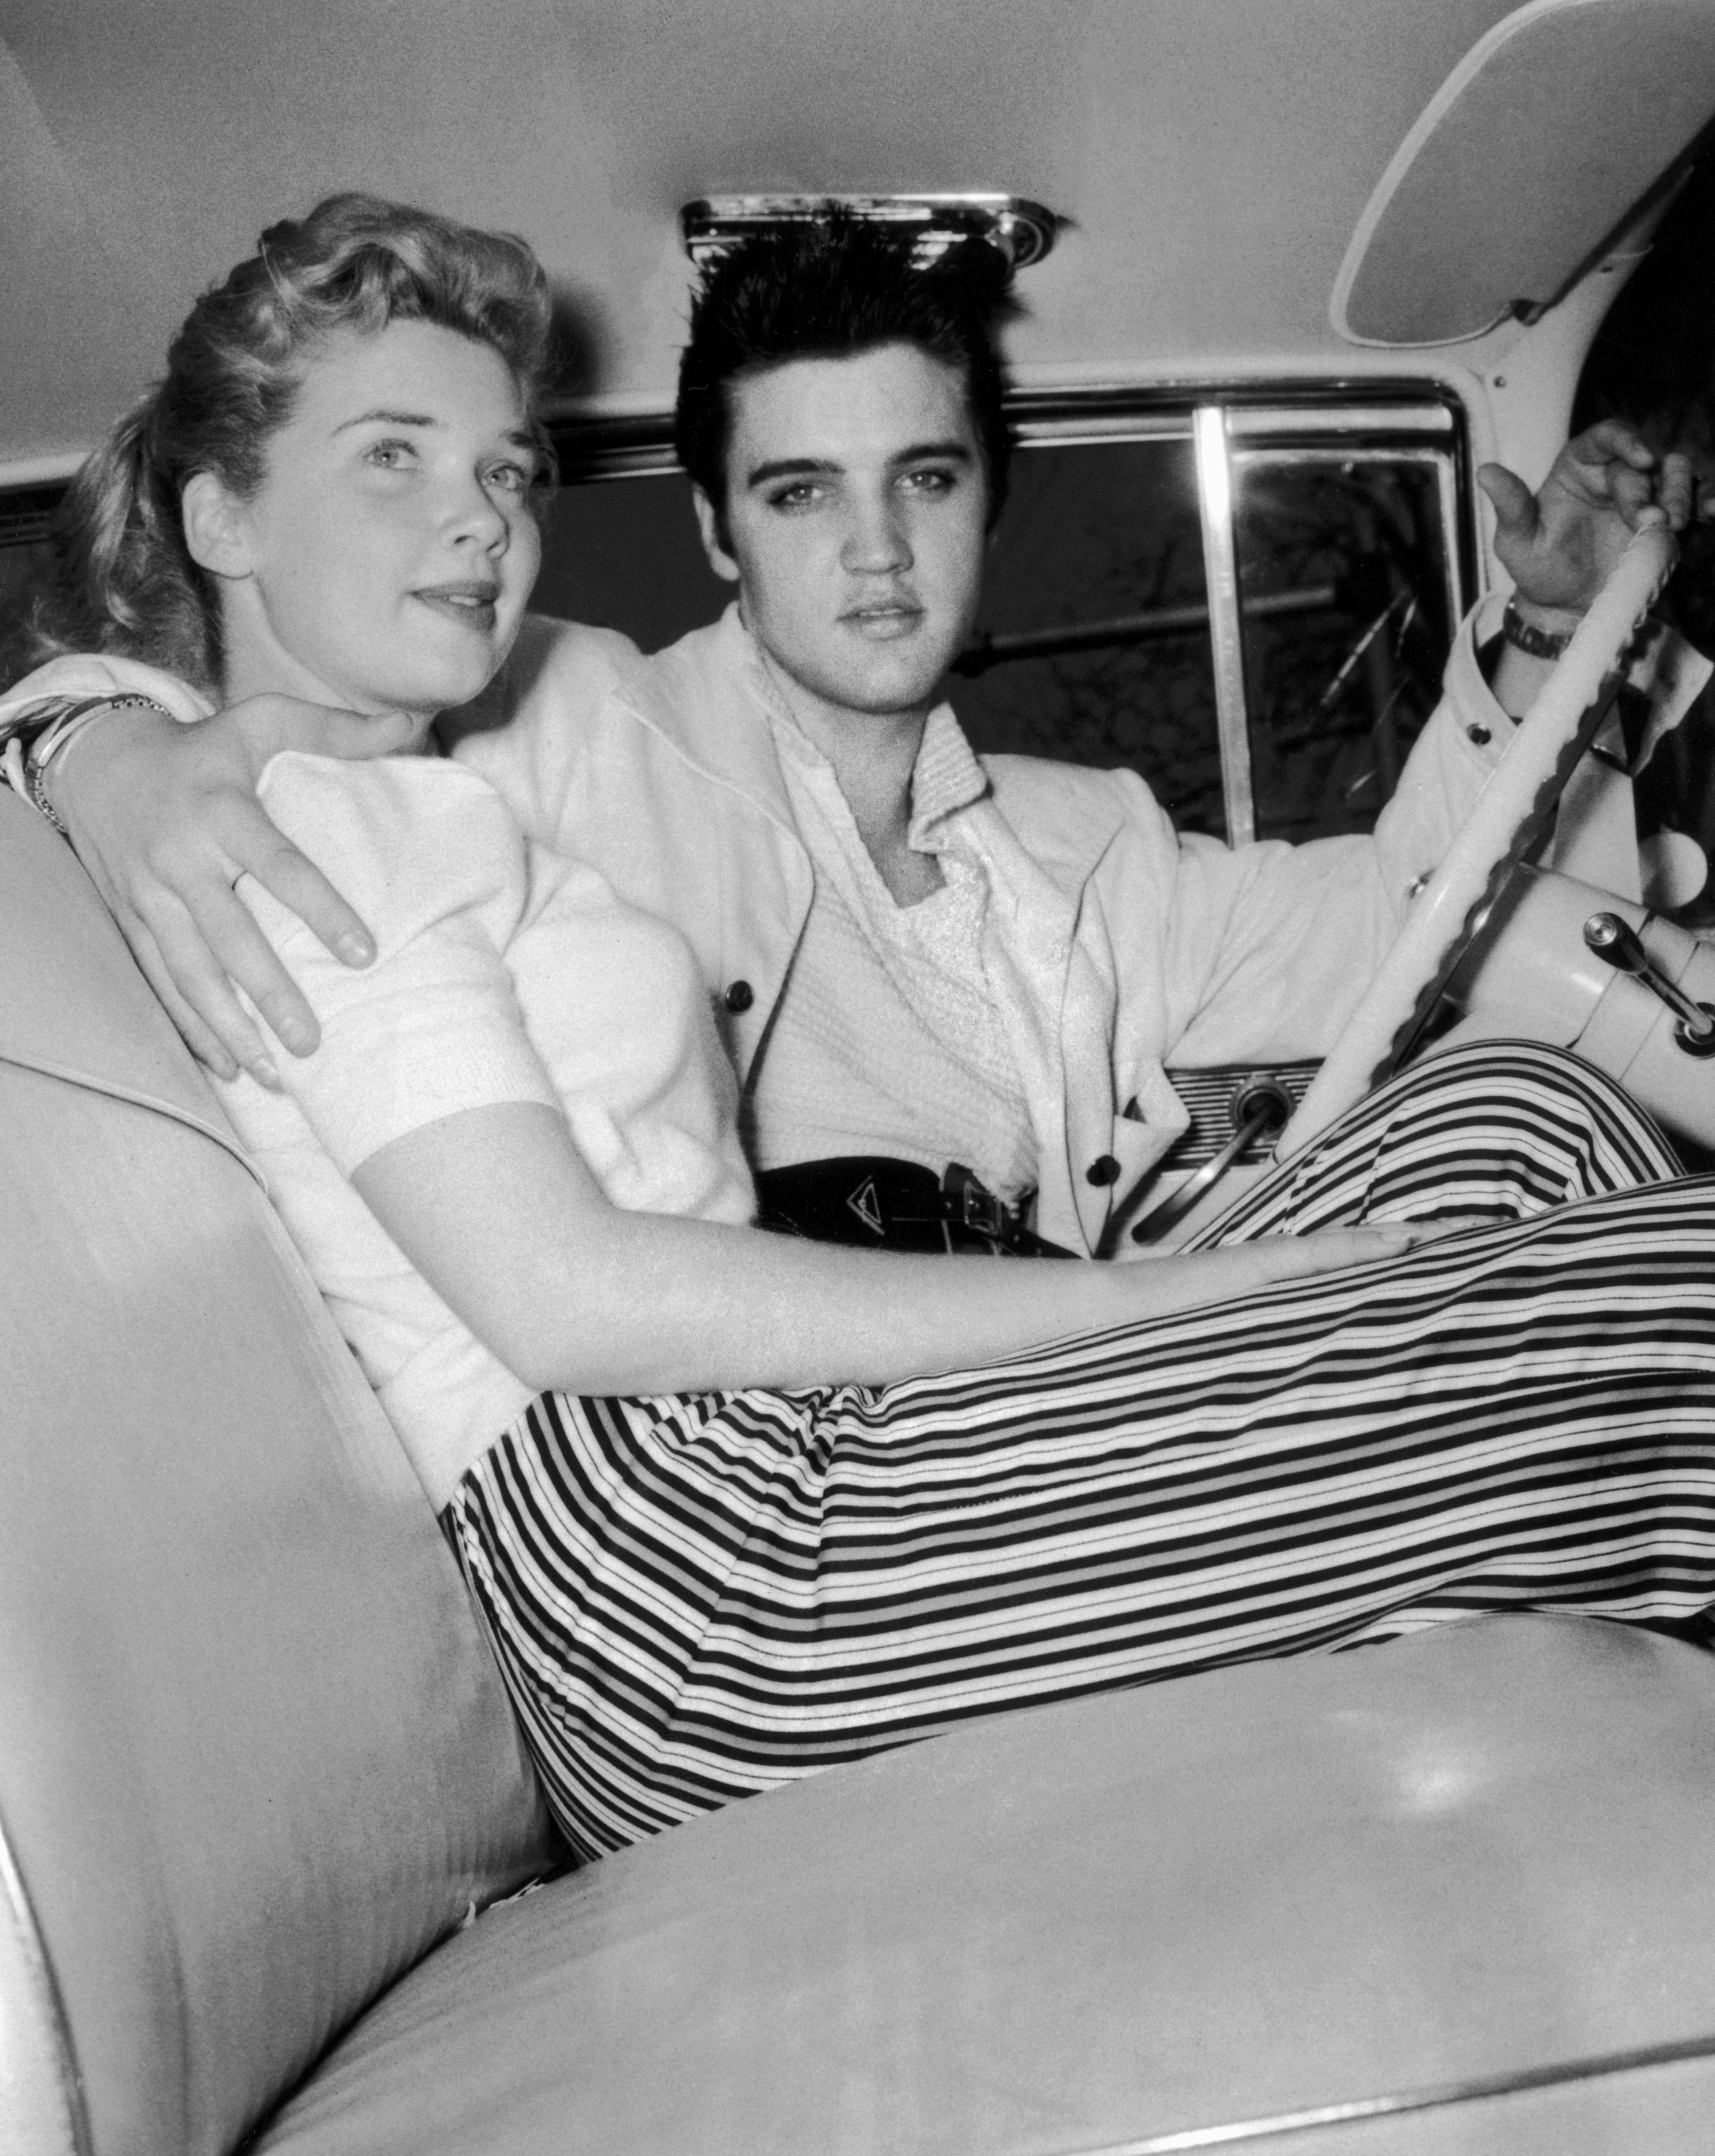 Unknown Black and White Photograph - Elvis Presley with Sweetheart in Car Globe Photos Fine Art Print